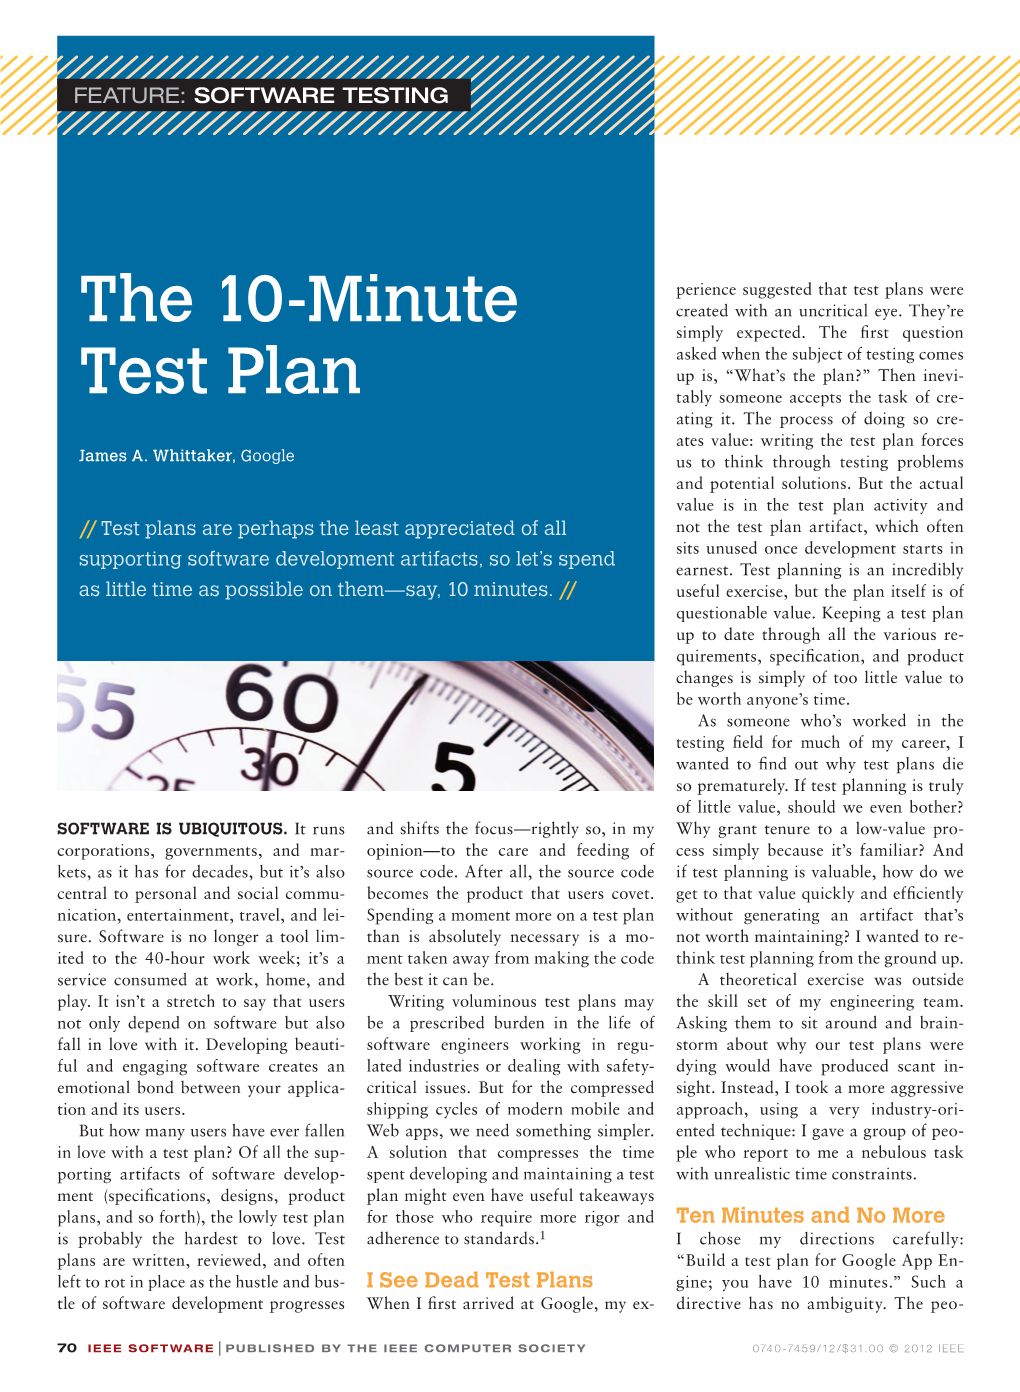 The 10-Minute Test Plan